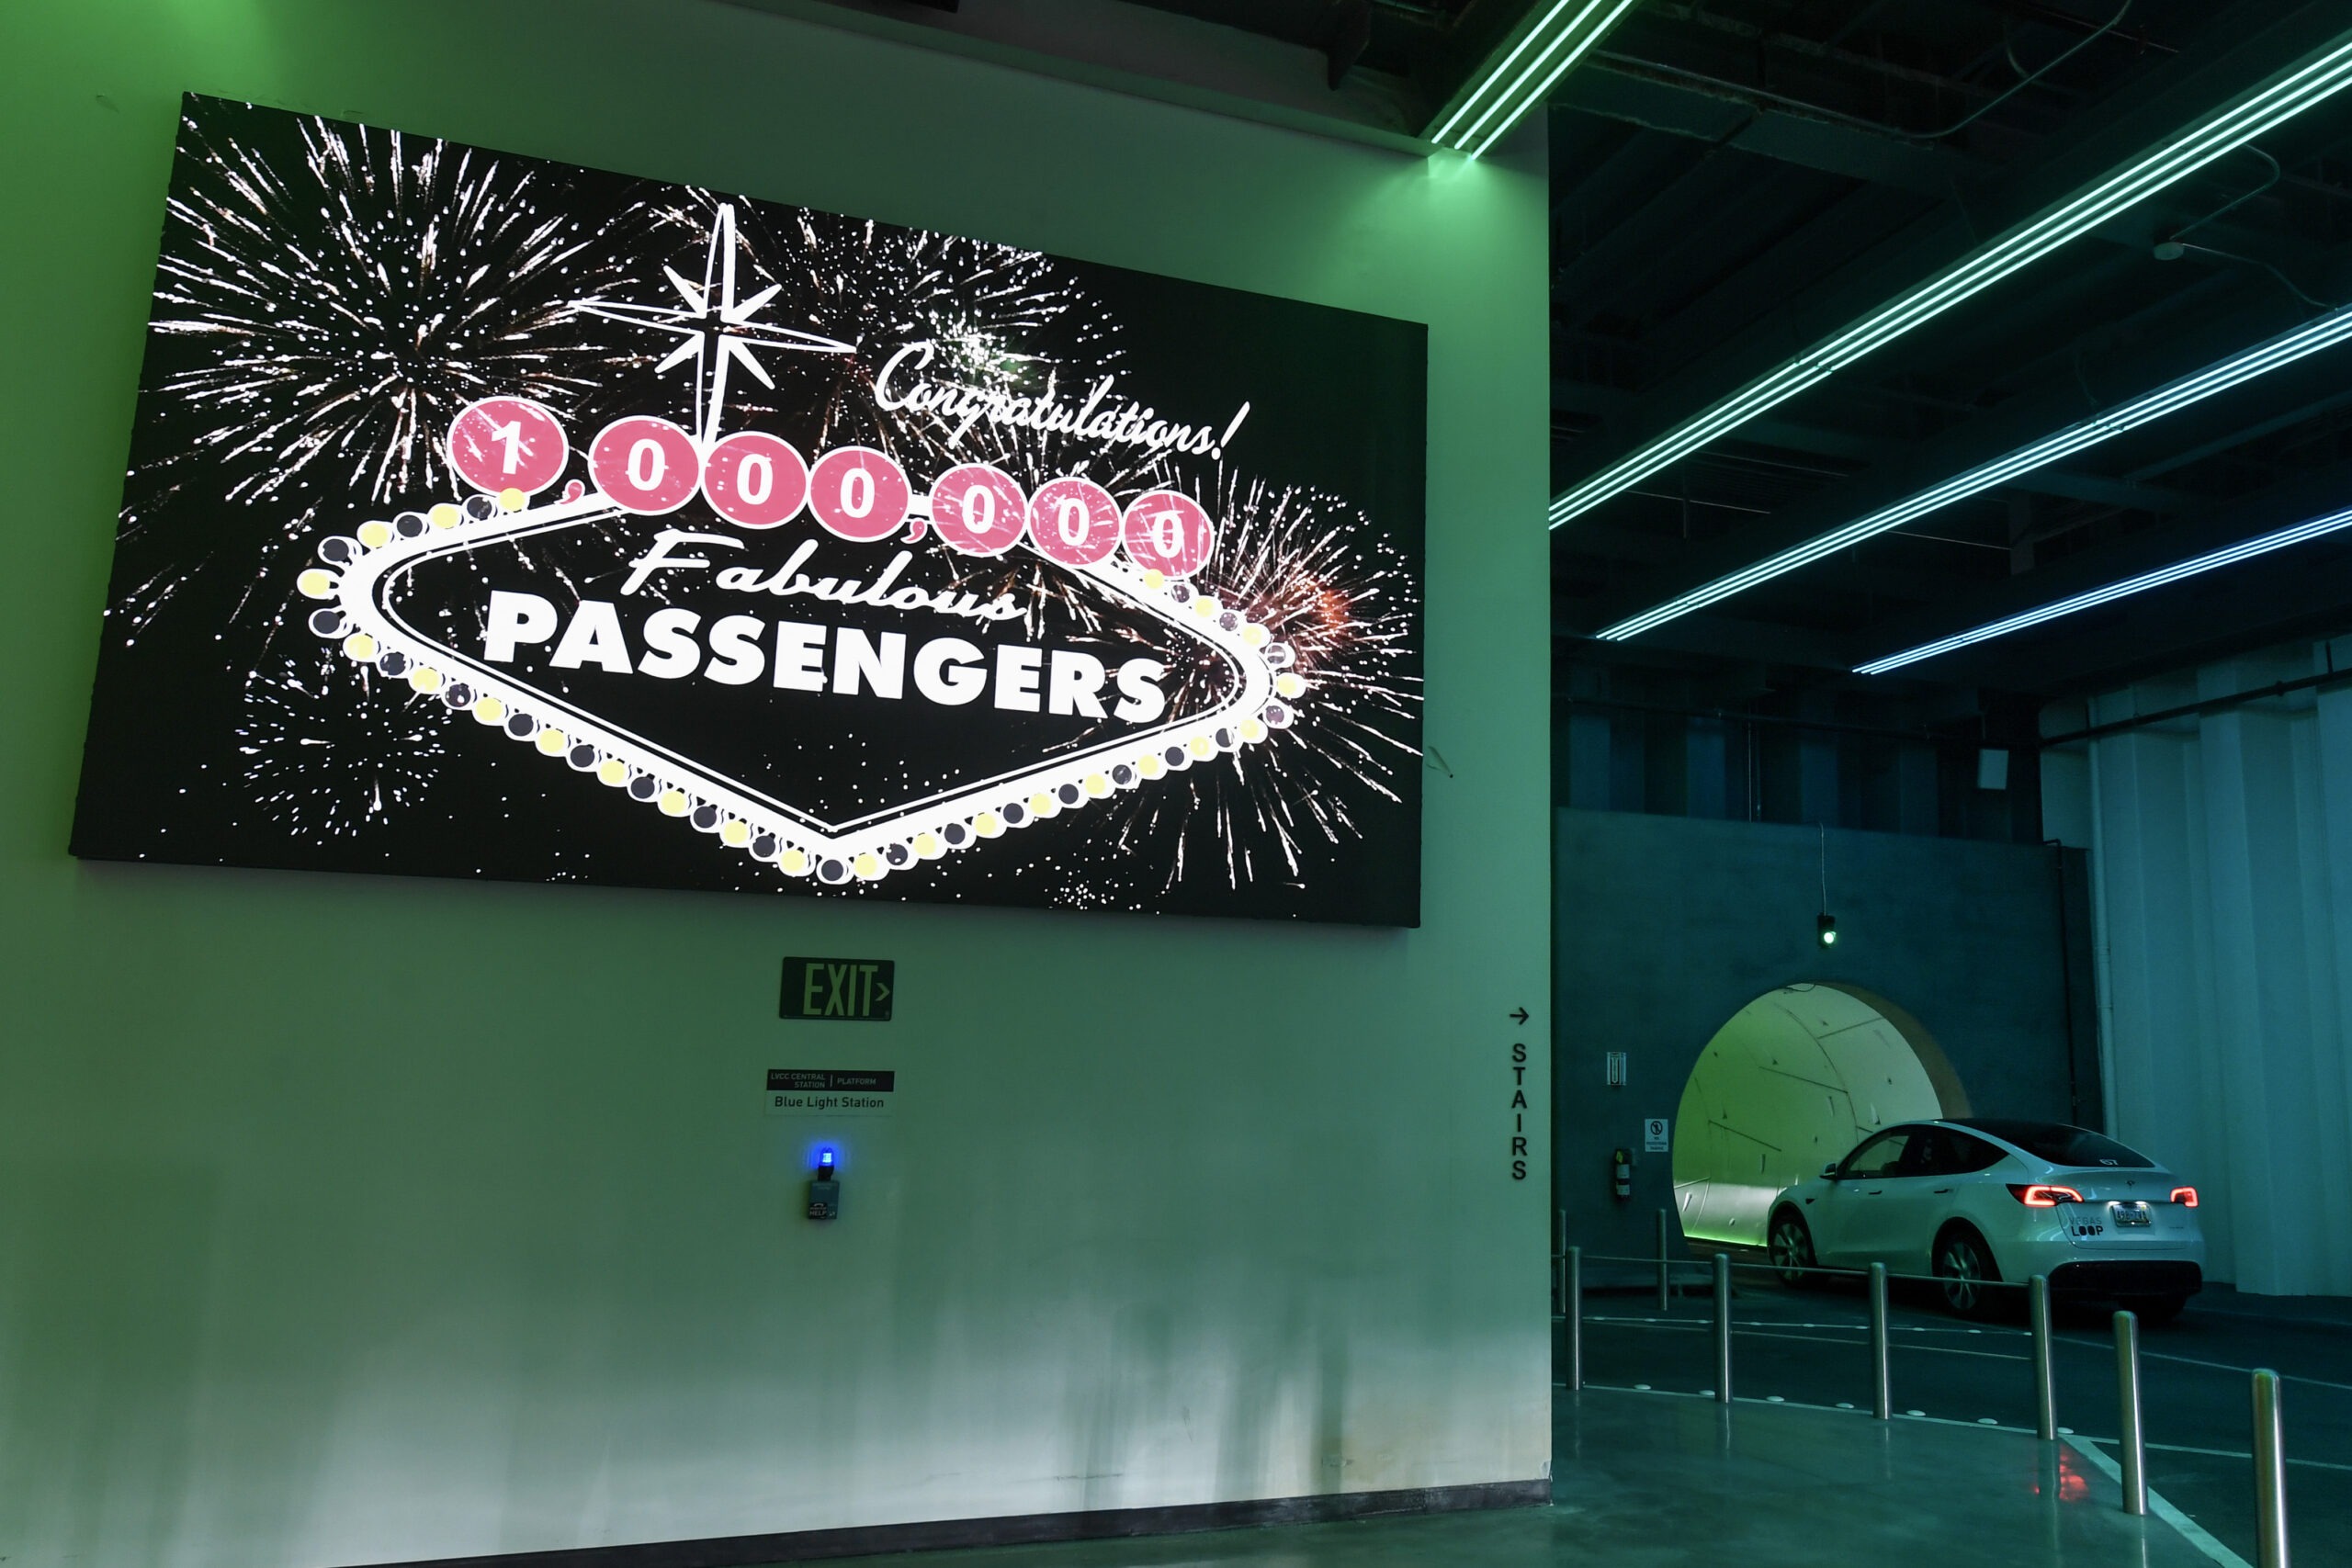 A digital sign in the Vegas Loop central station celebrates the 1,000,000th passenger on the transportation system Tuesday, March 14, 2023, at the Las Vegas Convention Center in Las Vegas, Nevada. (Sam Morris, LVCVA Archive)